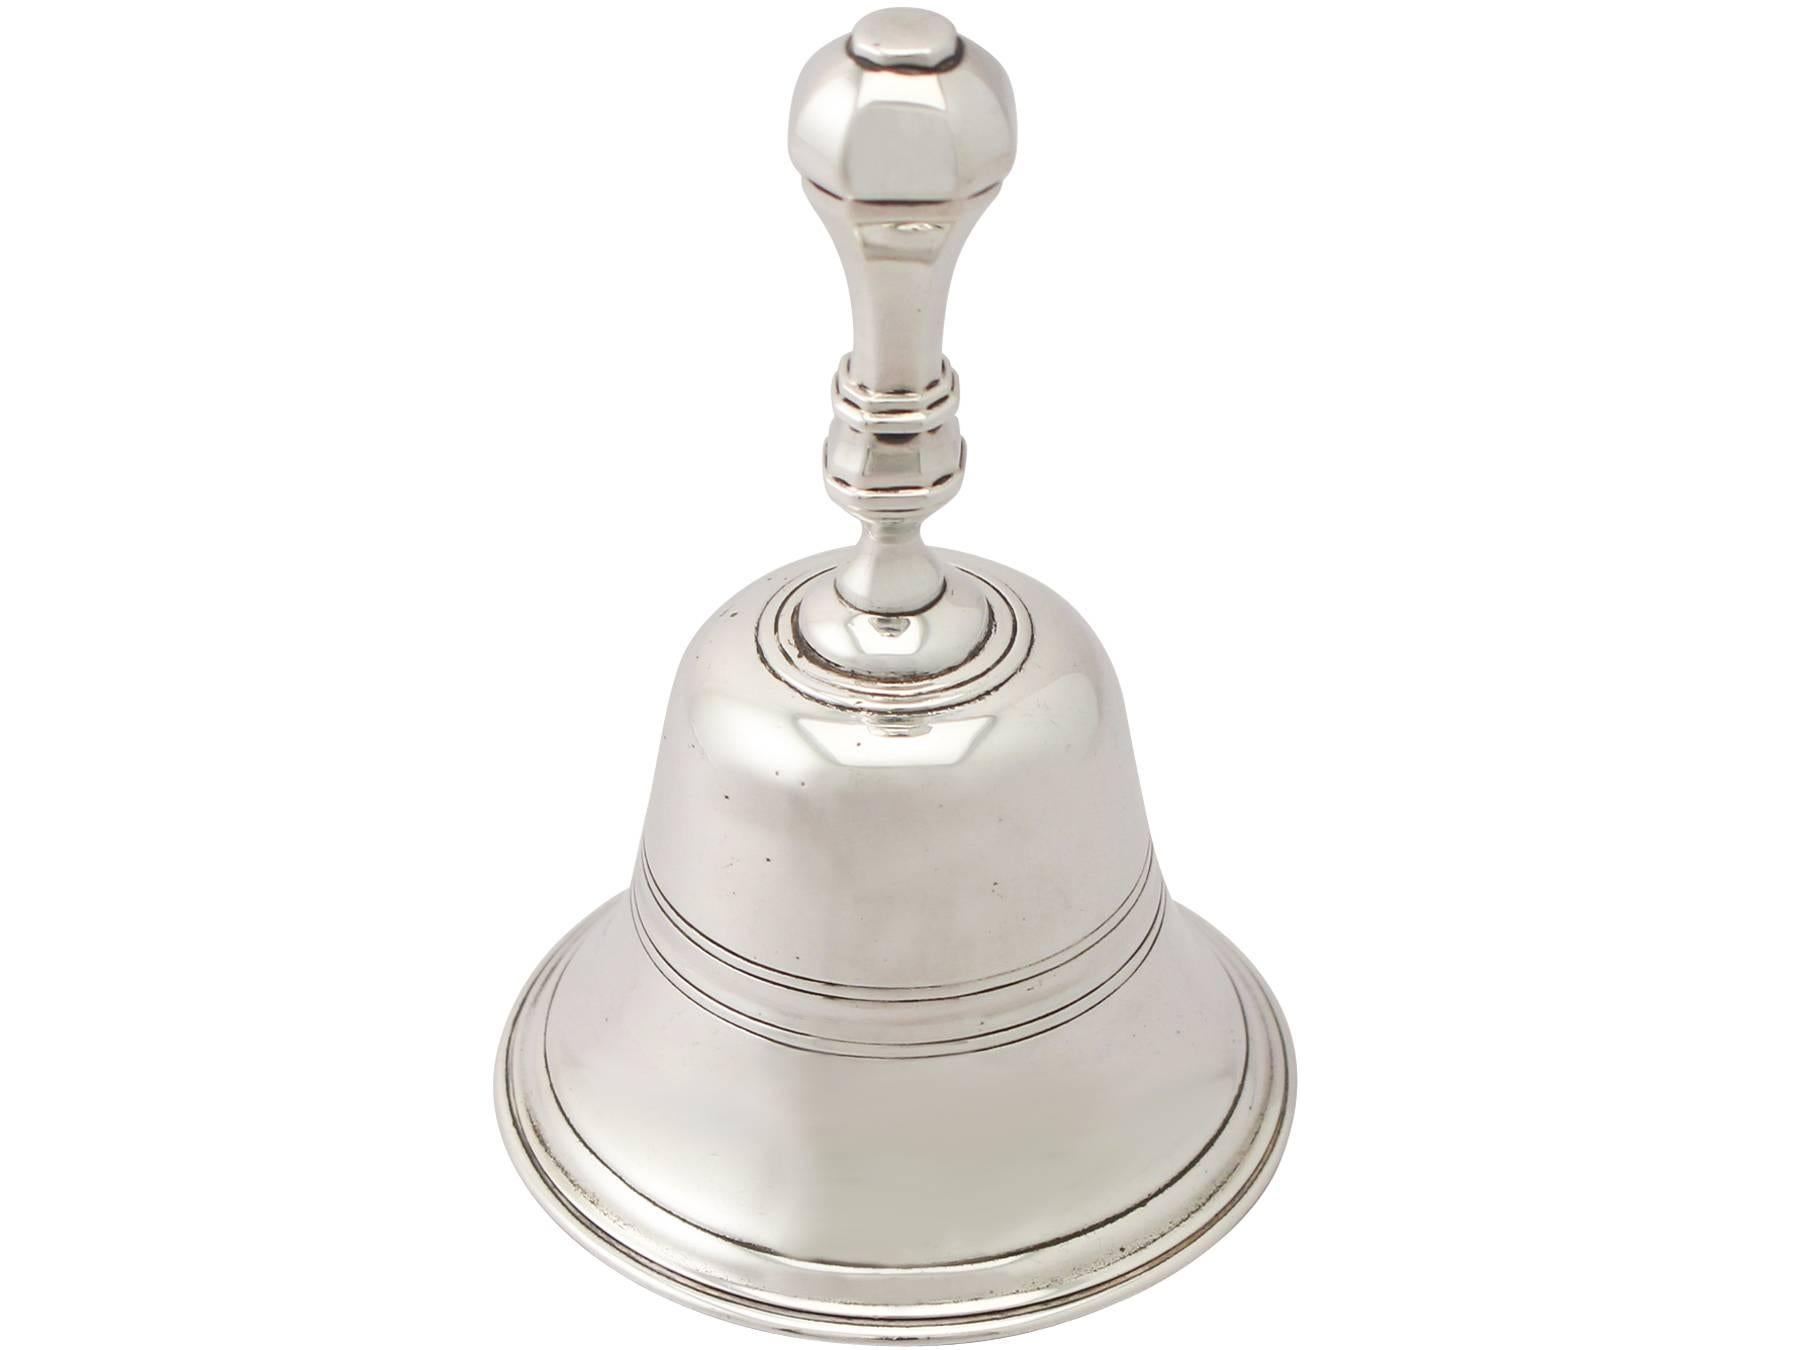 An exceptional, fine and impressive antique Victorian English sterling silver table bell; an addition to our range of ornamental silverware.

This exceptional antique Victorian sterling silver table bell has a plain bell shaped form.

The